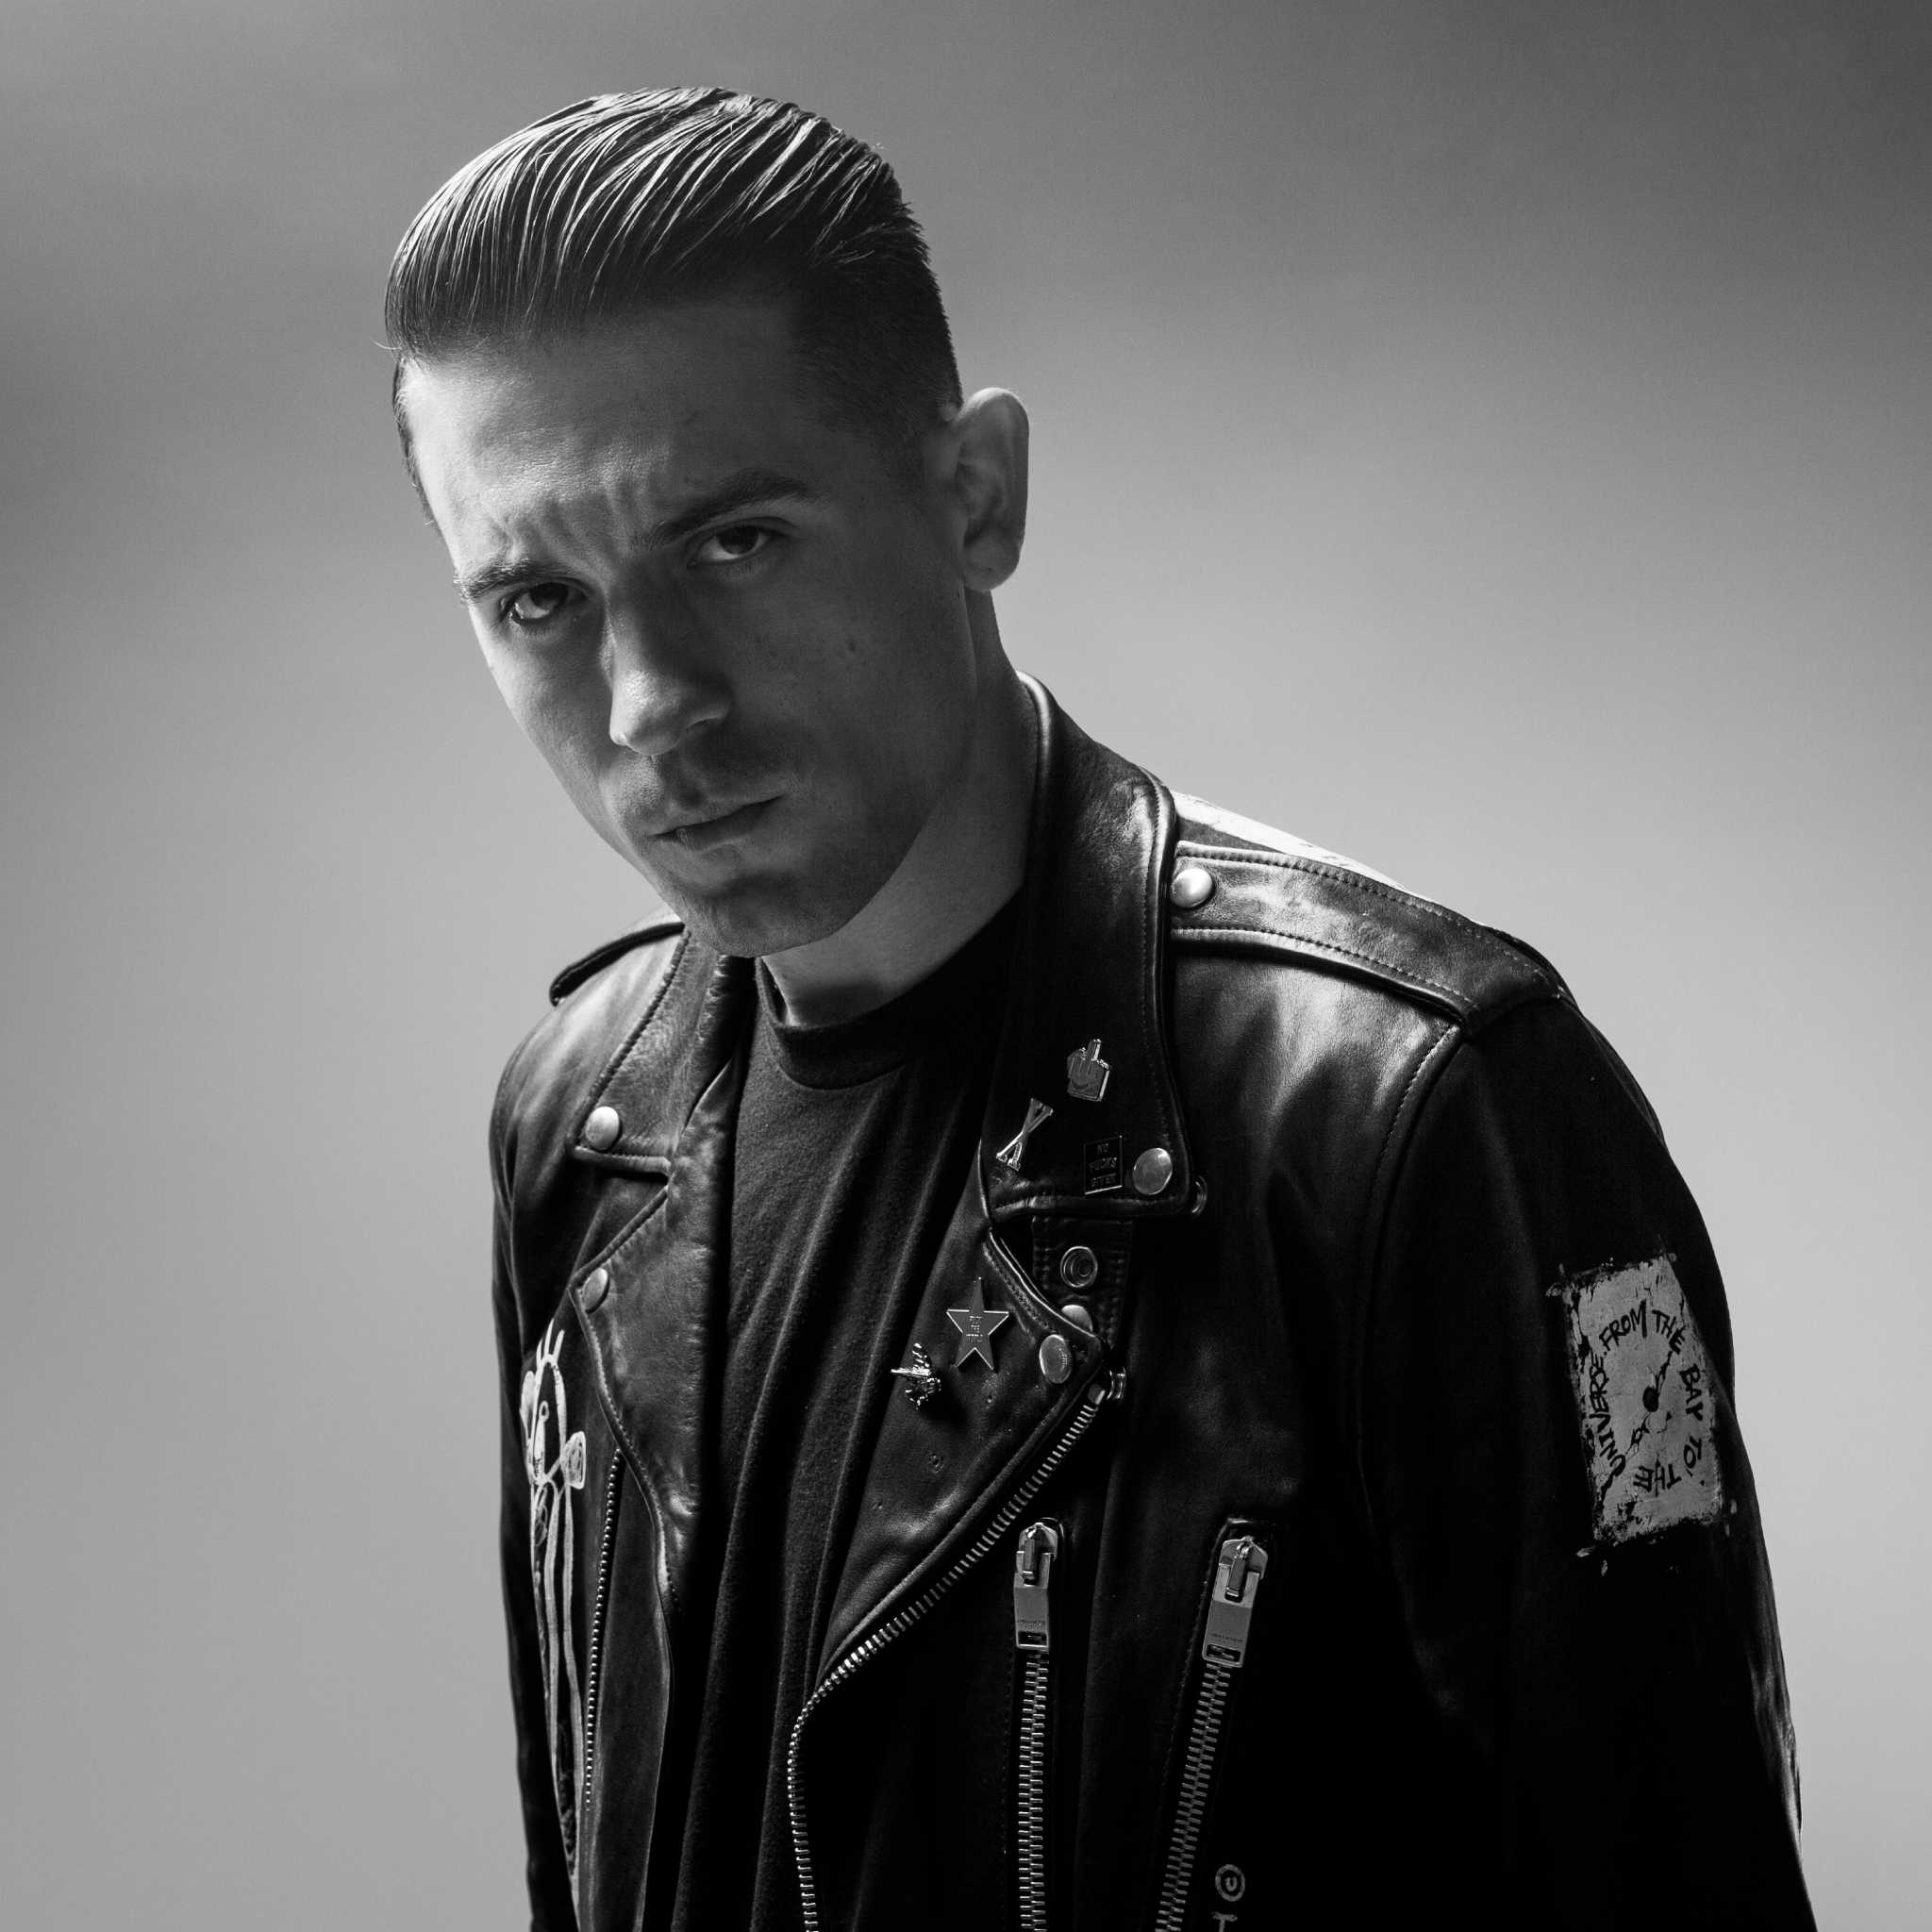 GEazy’s ‘Endless Summer Tour’ at Hartford’s Xfinity Theatre